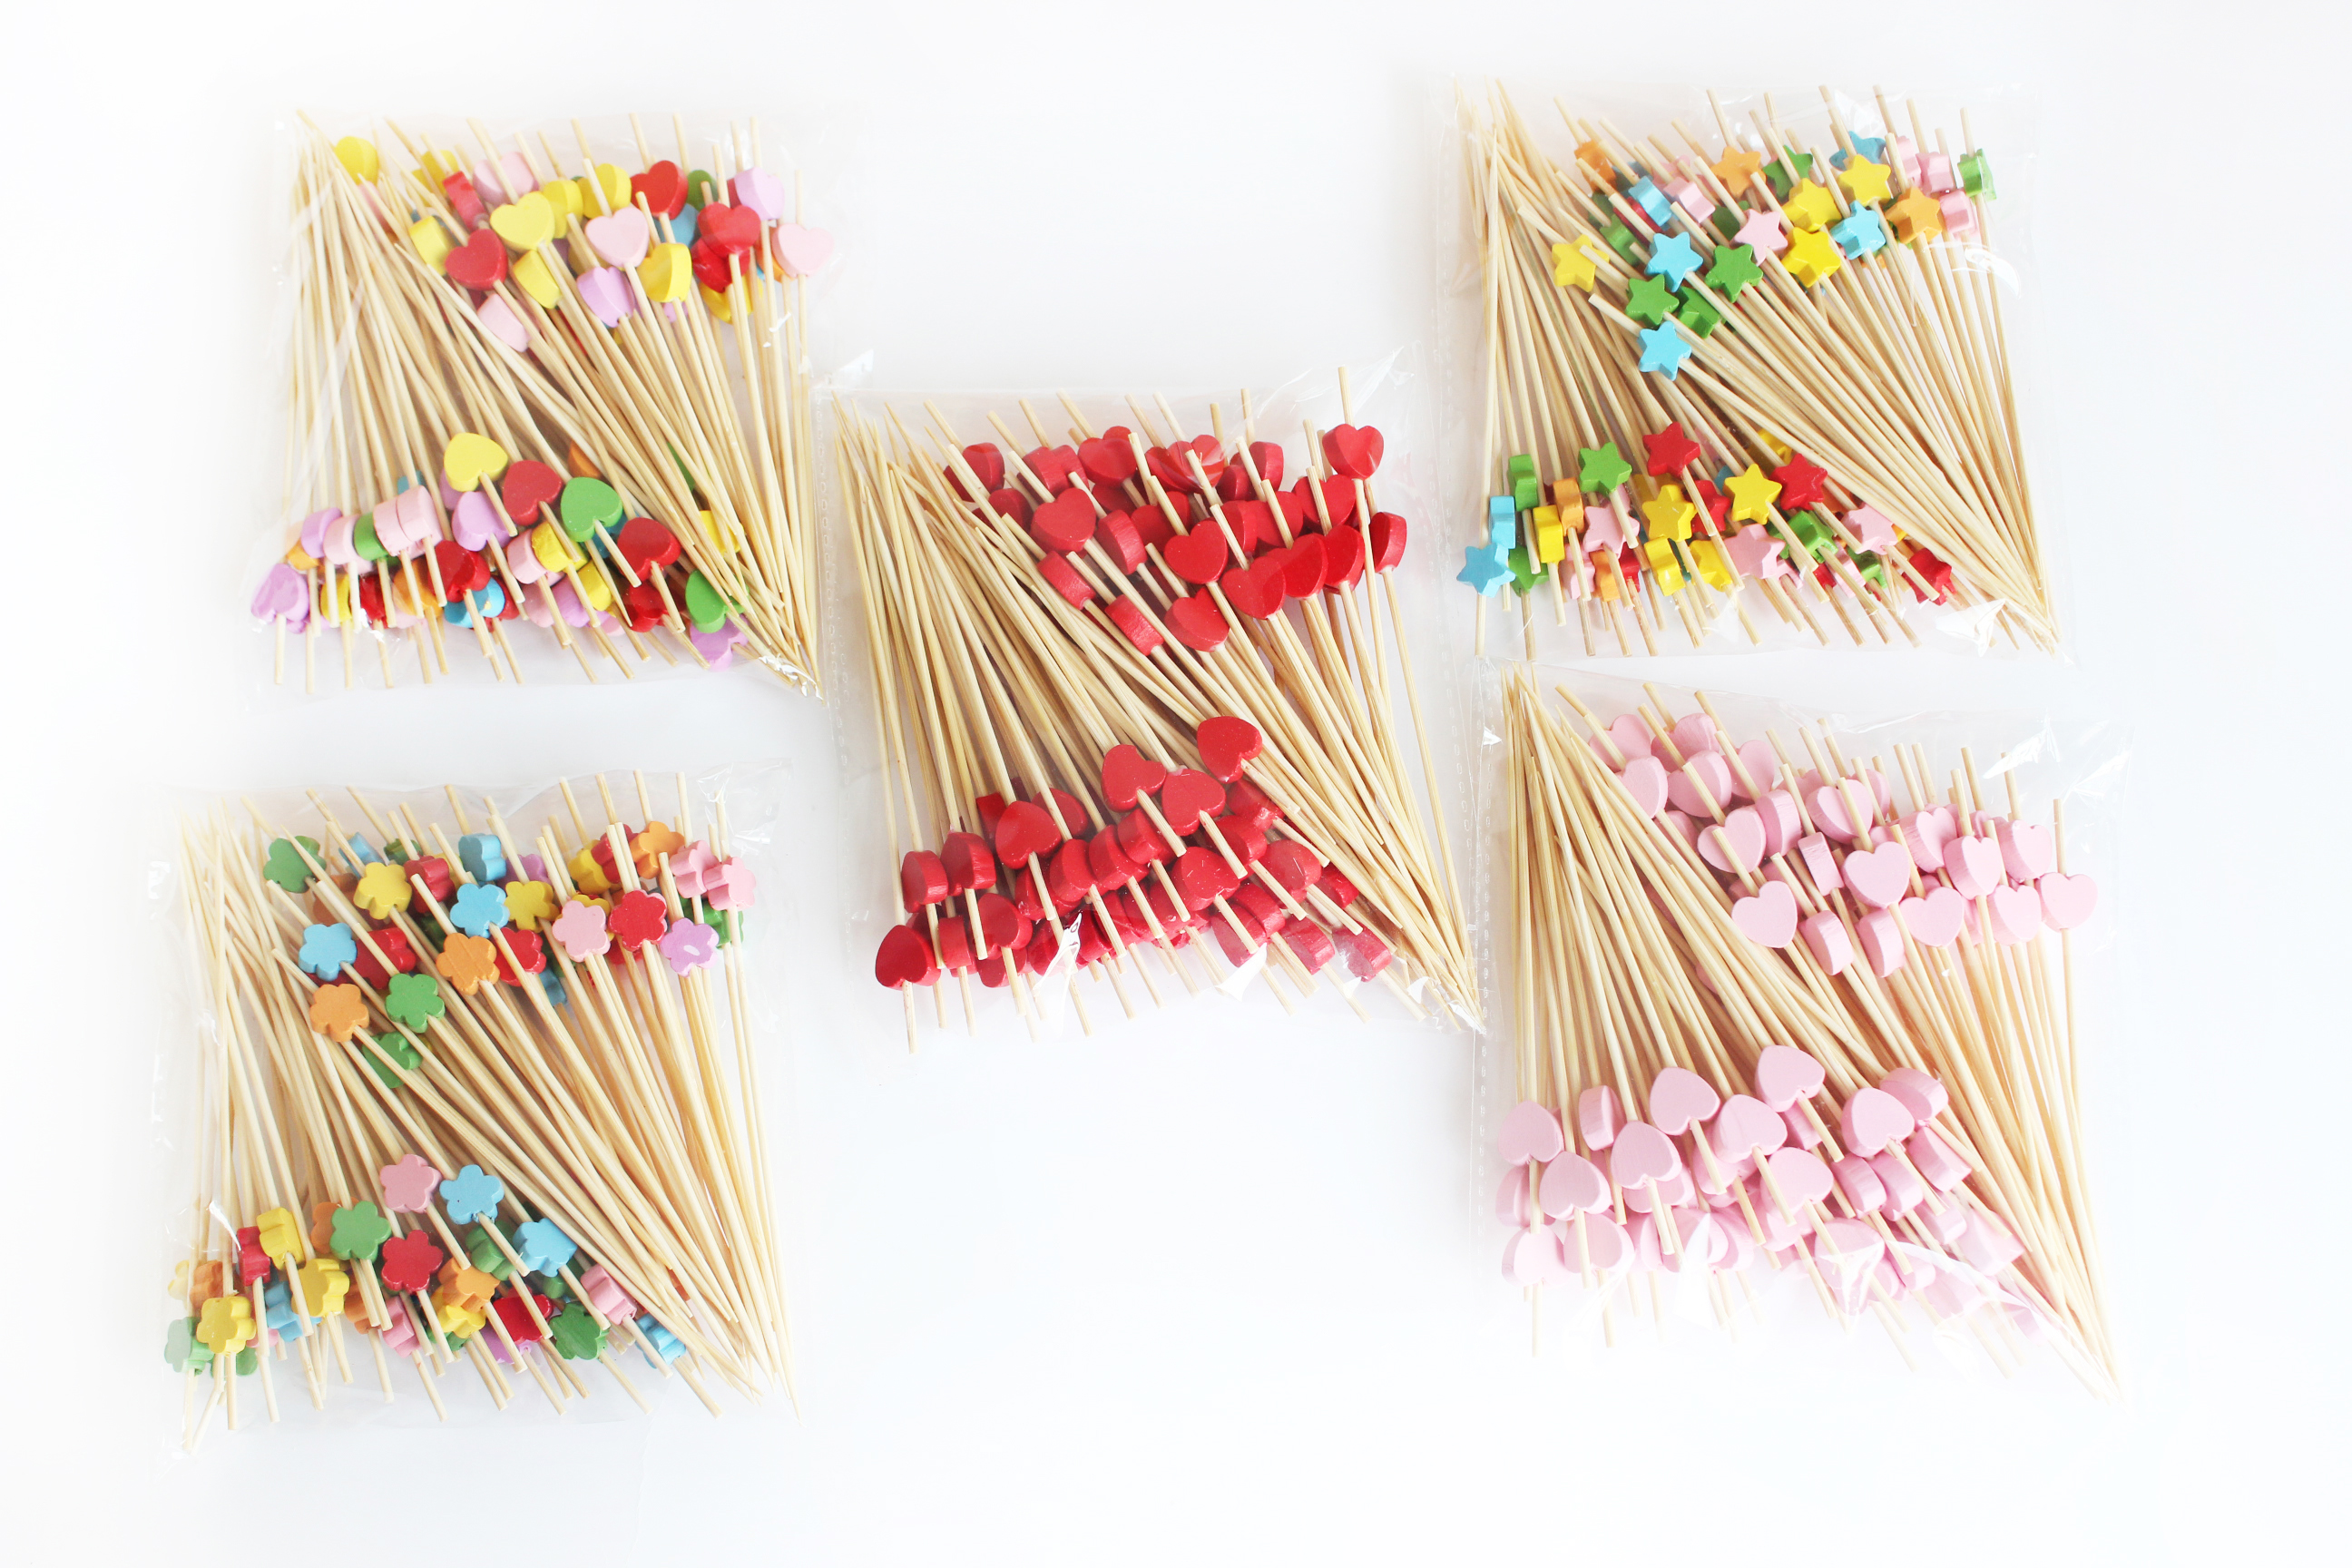 100PCS Handmade Cocktail Picks 100 Count Sticks bamboo Toothpicks Party Supplies Shiny fruit stick for parties